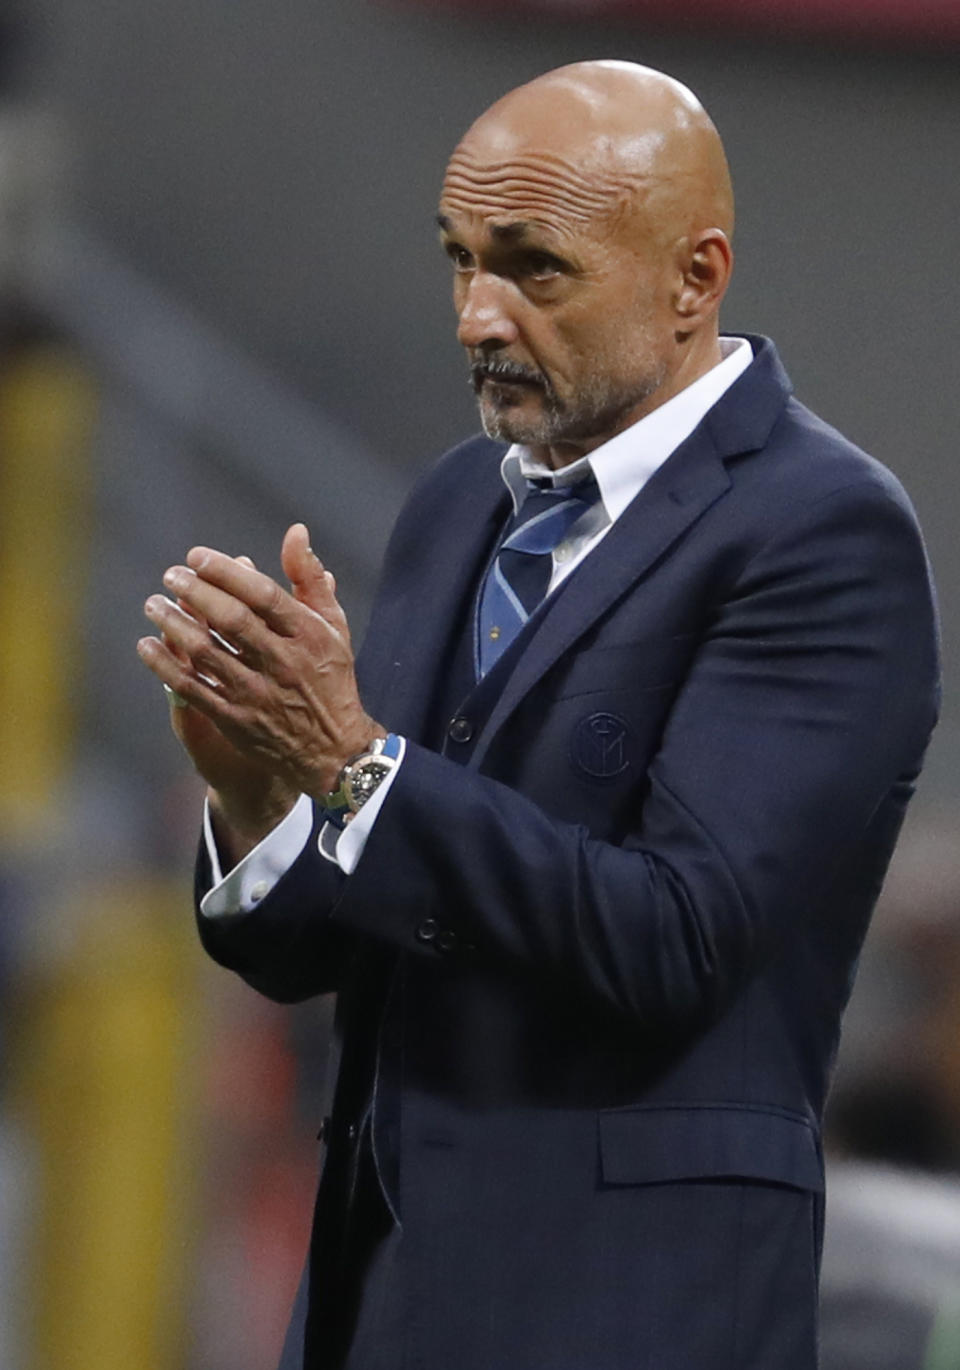 Inter Milan coach Luciano Spalletti applauds his team during the Serie A soccer match between Inter Milan and Genoa at the San Siro Stadium in Milan, Italy, Saturday, Nov. 3, 2018. Inter trashed Genoa 5 - 0. (AP Photo/Antonio Calanni)